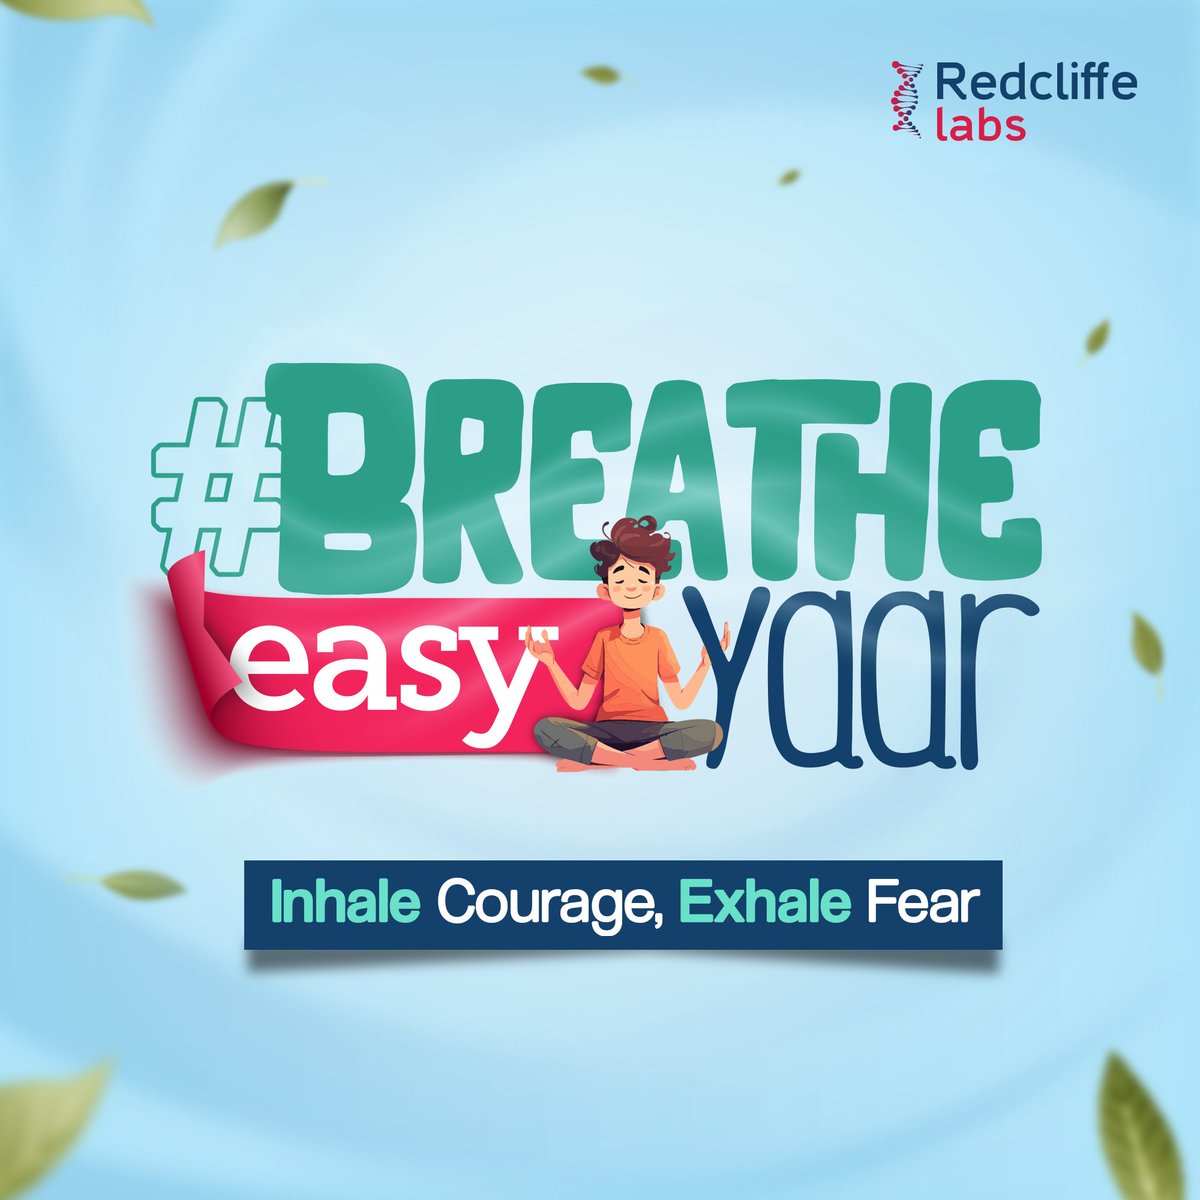 Your breath is your power. When life gets tough, just remember to breathe easy. Together, let's empower each other to face asthma with bravery, optimism, and the right knowledge. Join the movement because every breath matters. #BreatheEasyYaar #AsthmaAwareness